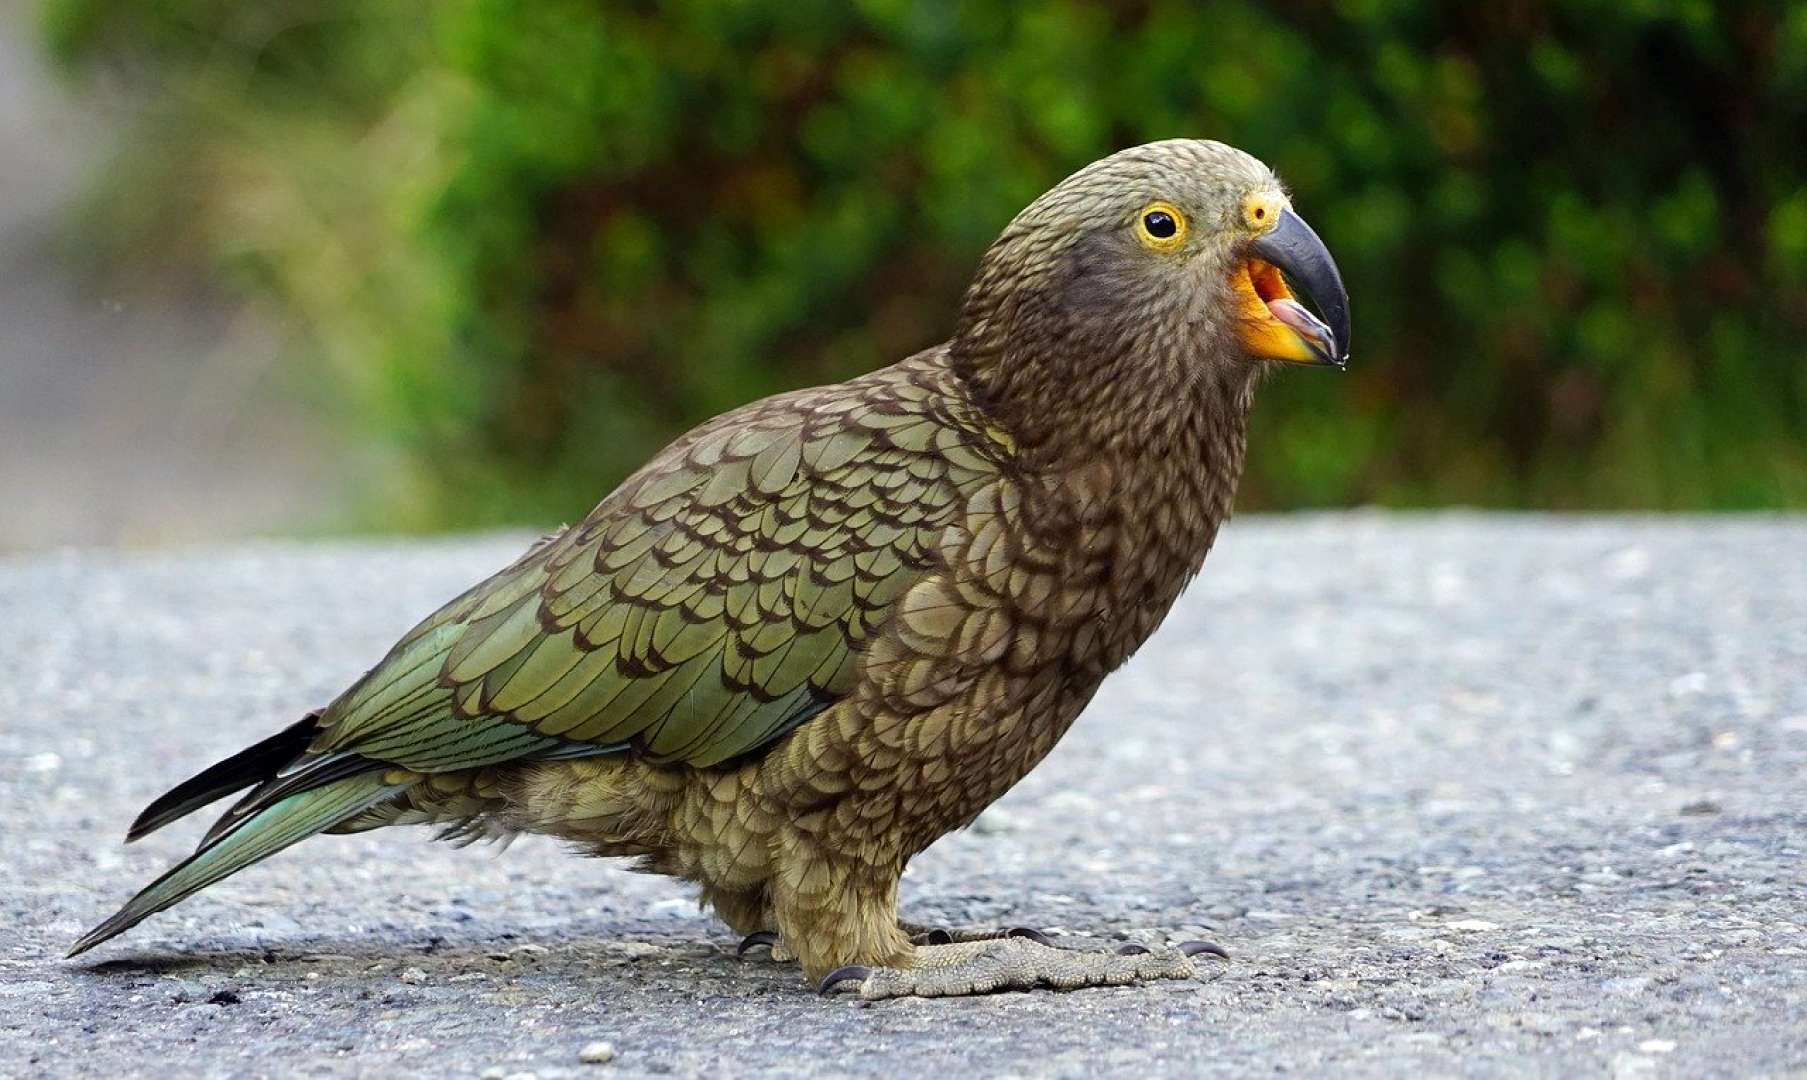 Kea, New Zealands native parrot at Milford Sound